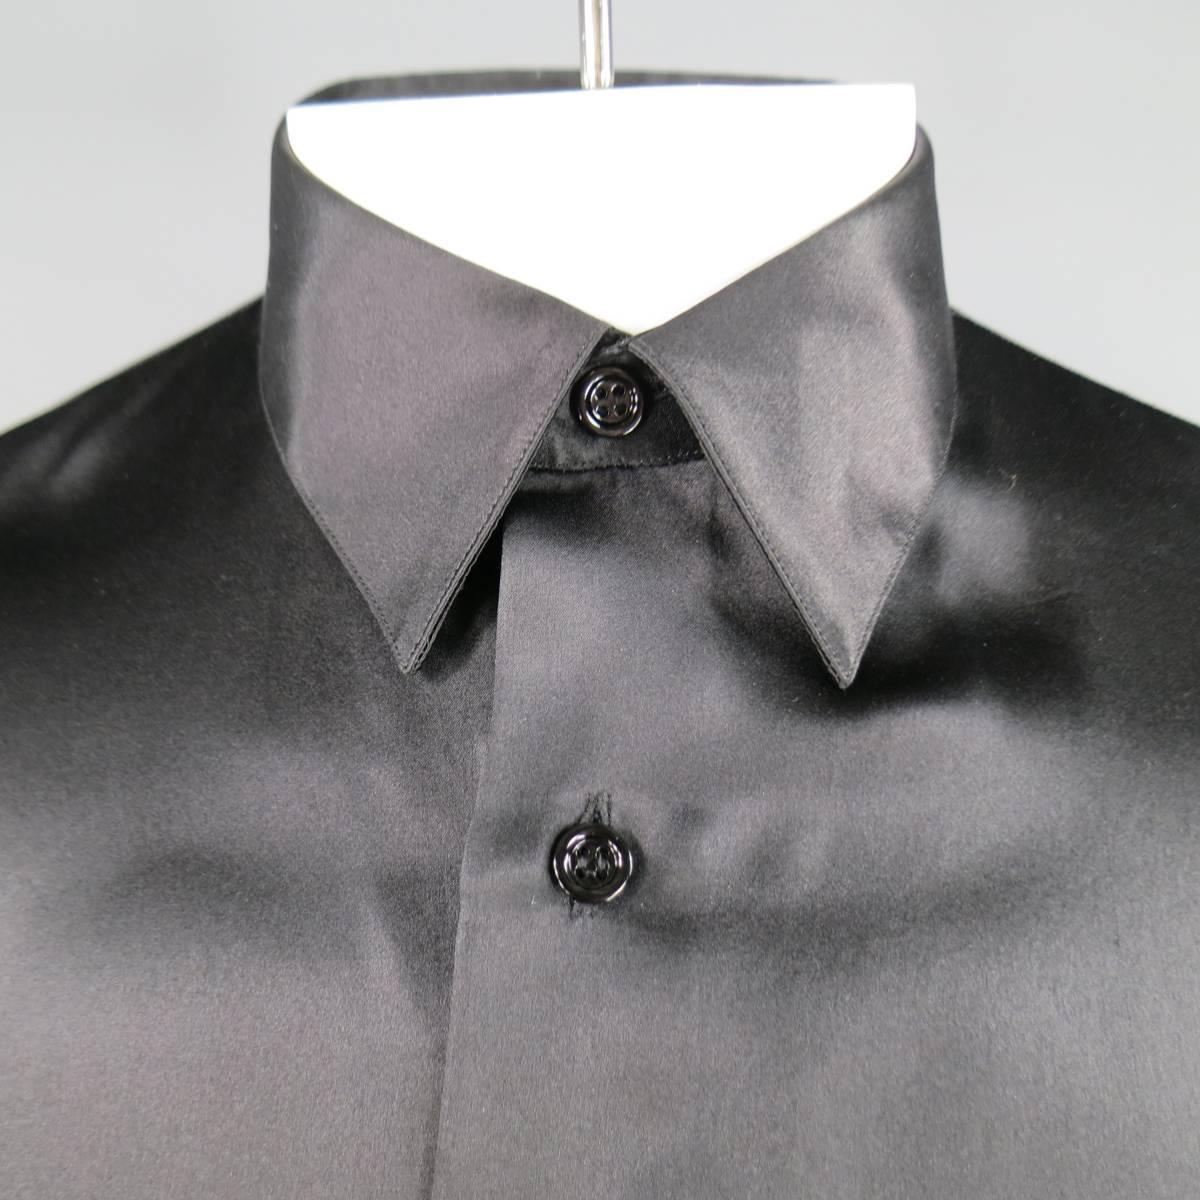 This rare DIOR HOMME by Hedi Slimane dress shirt comes in smooth black silk satin with a pointed collar, fitted tailoring, and signature dart seam details. Japan Exclusive. Made in Italy.
 
Good Pre-Owned Condition.
Marked: 39 